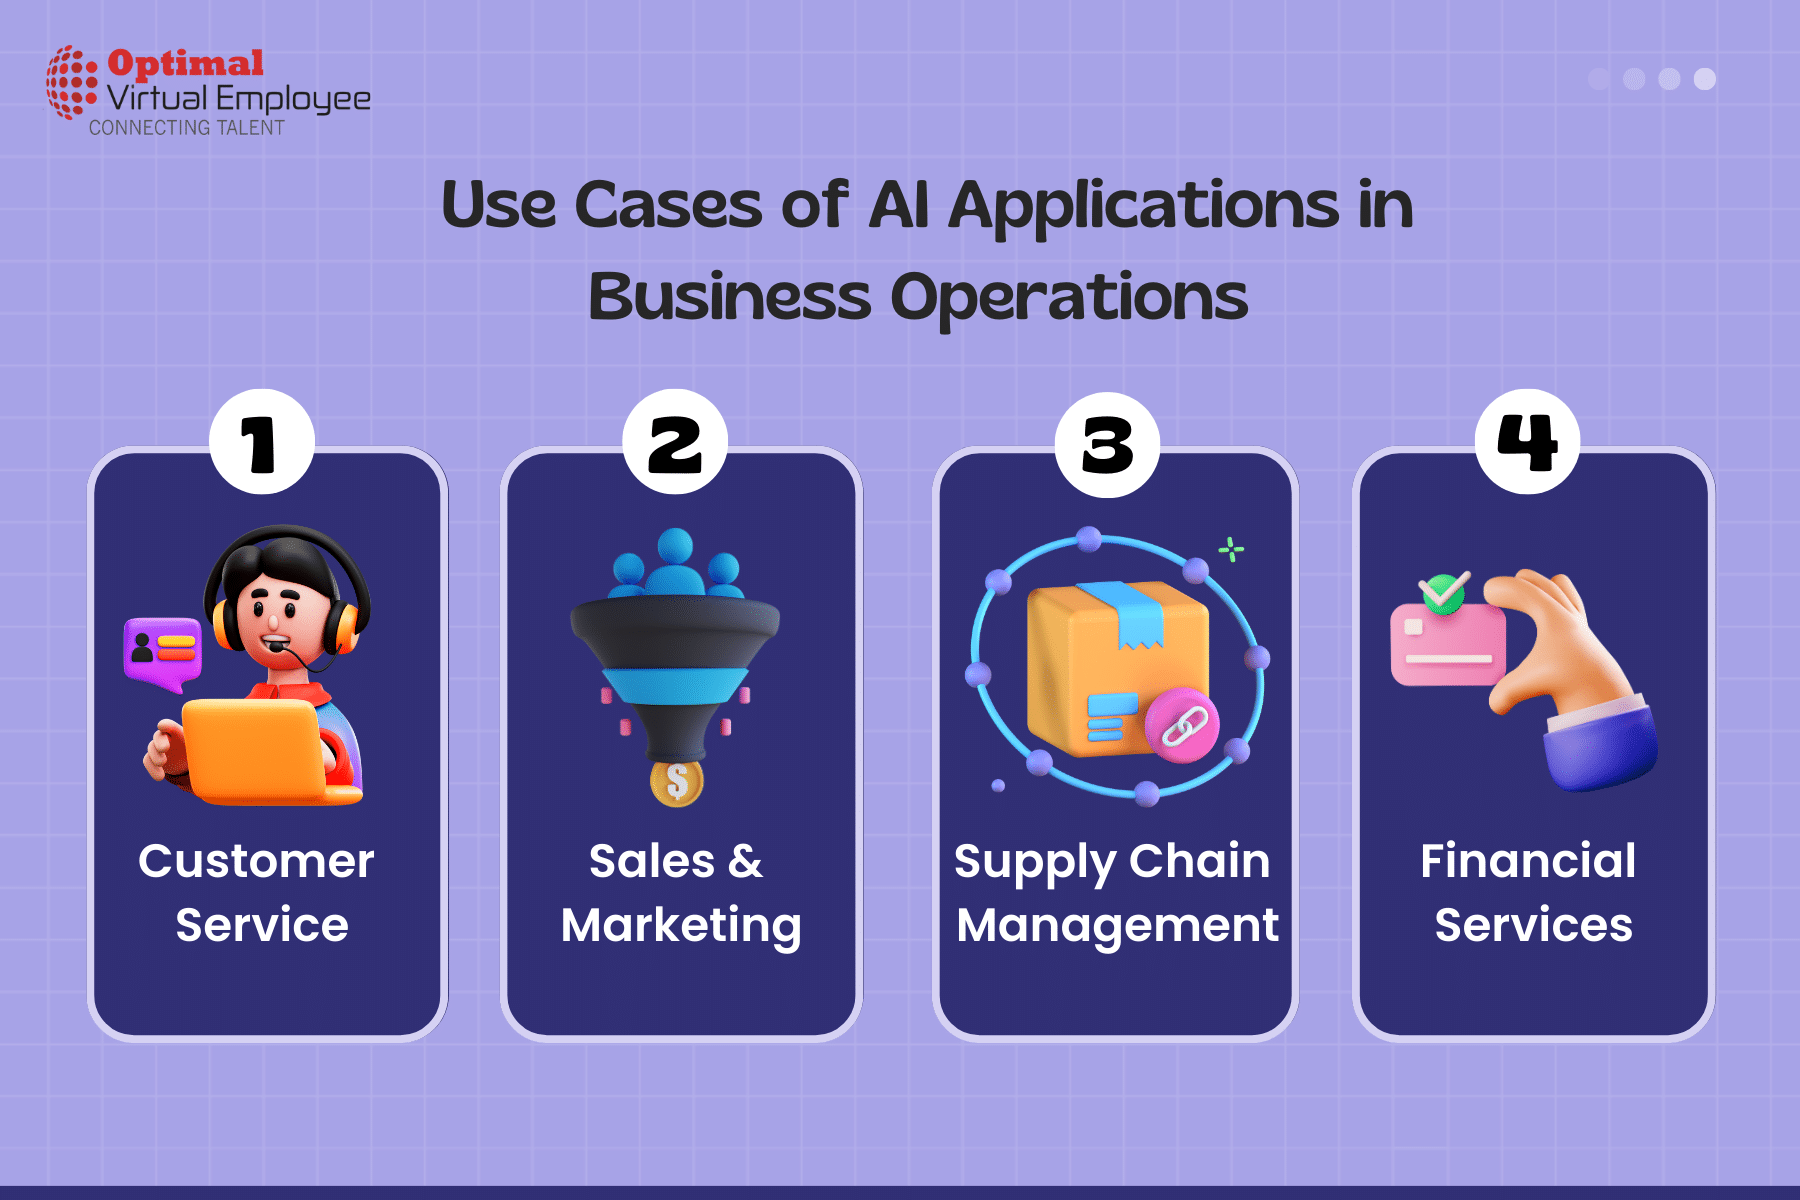 Use Cases of AI Applications in Business Operations